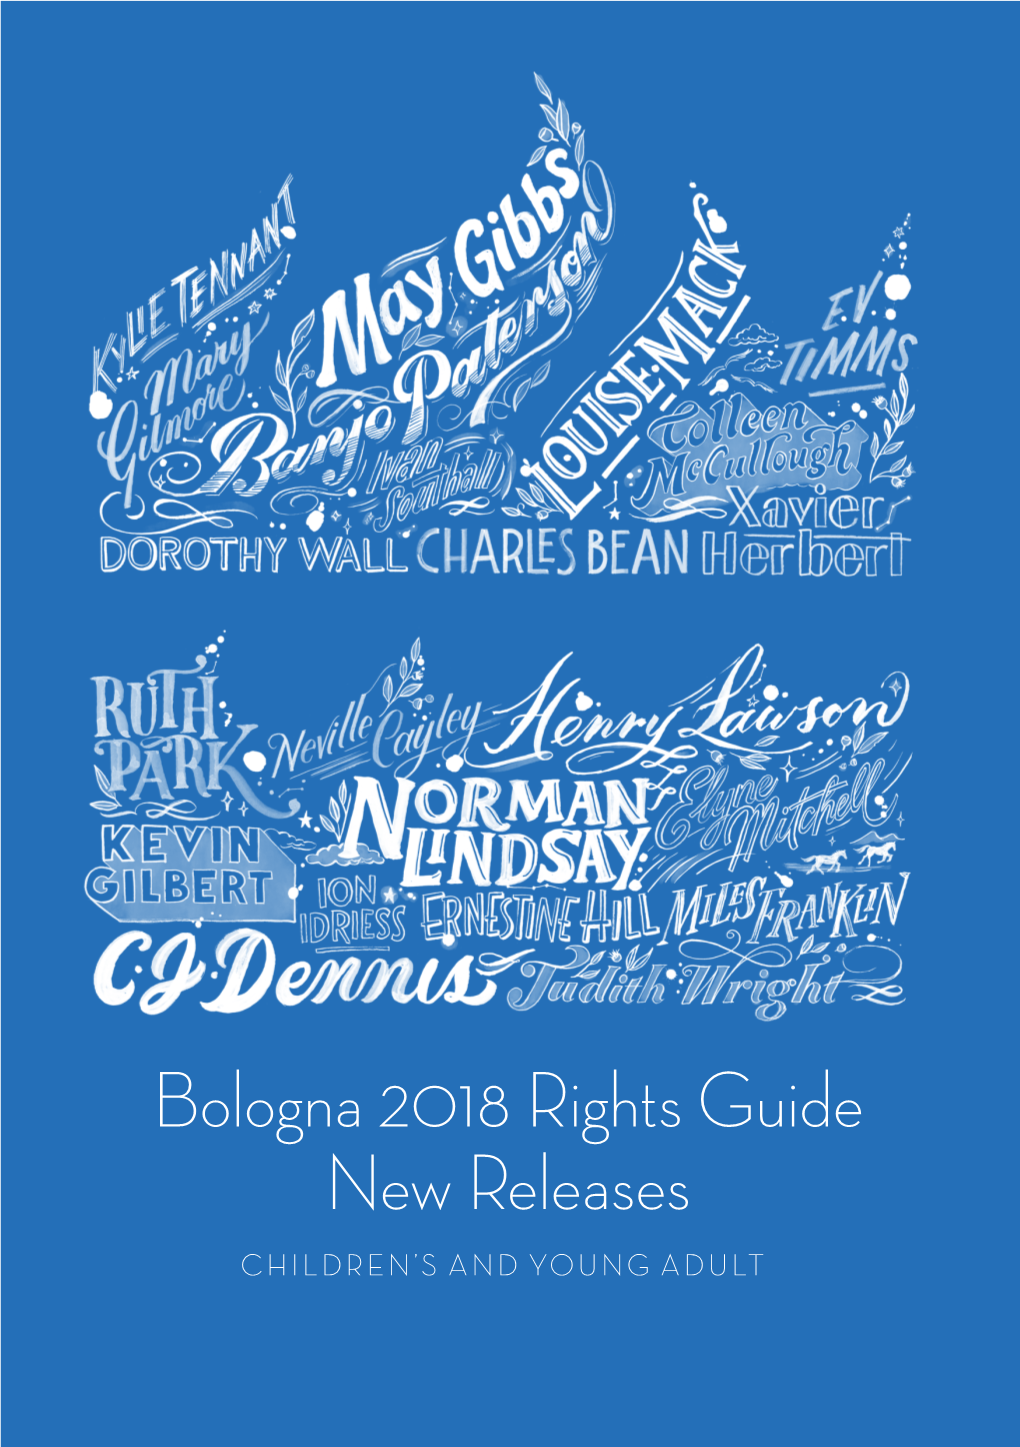 Bologna 2018 Rights Guide New Releases CHILDREN’S and YOUNG ADULT